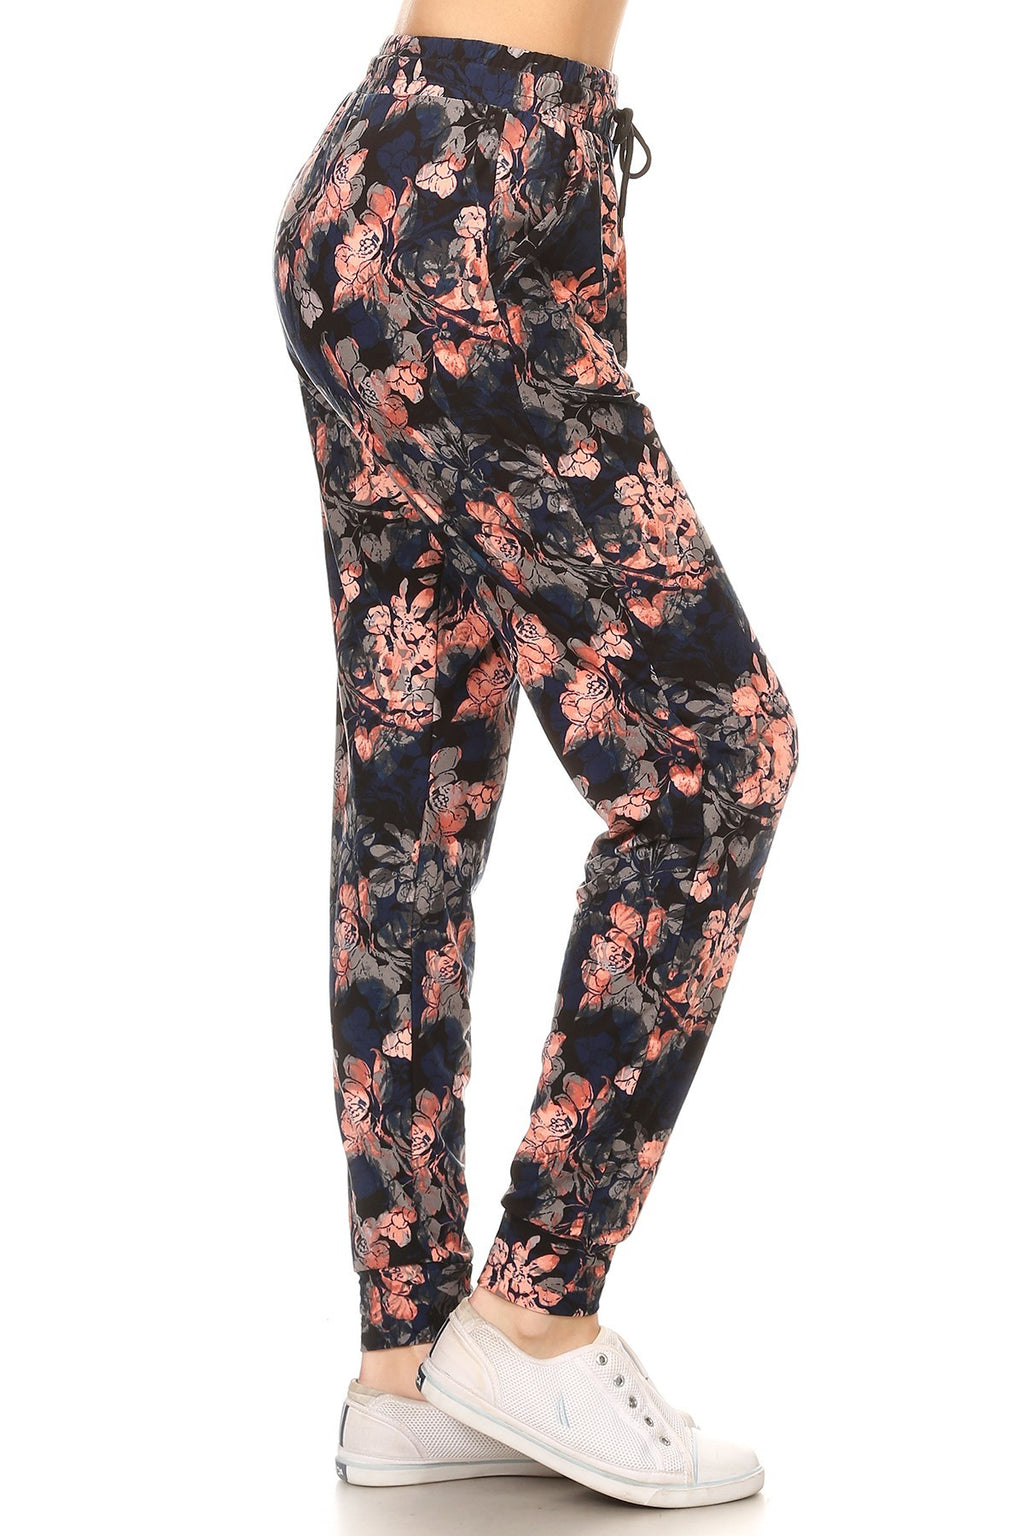 PINK BLUE FLORAL printed joggers with solid trim, drawstring waistband, waist pockets, and cuffed hems